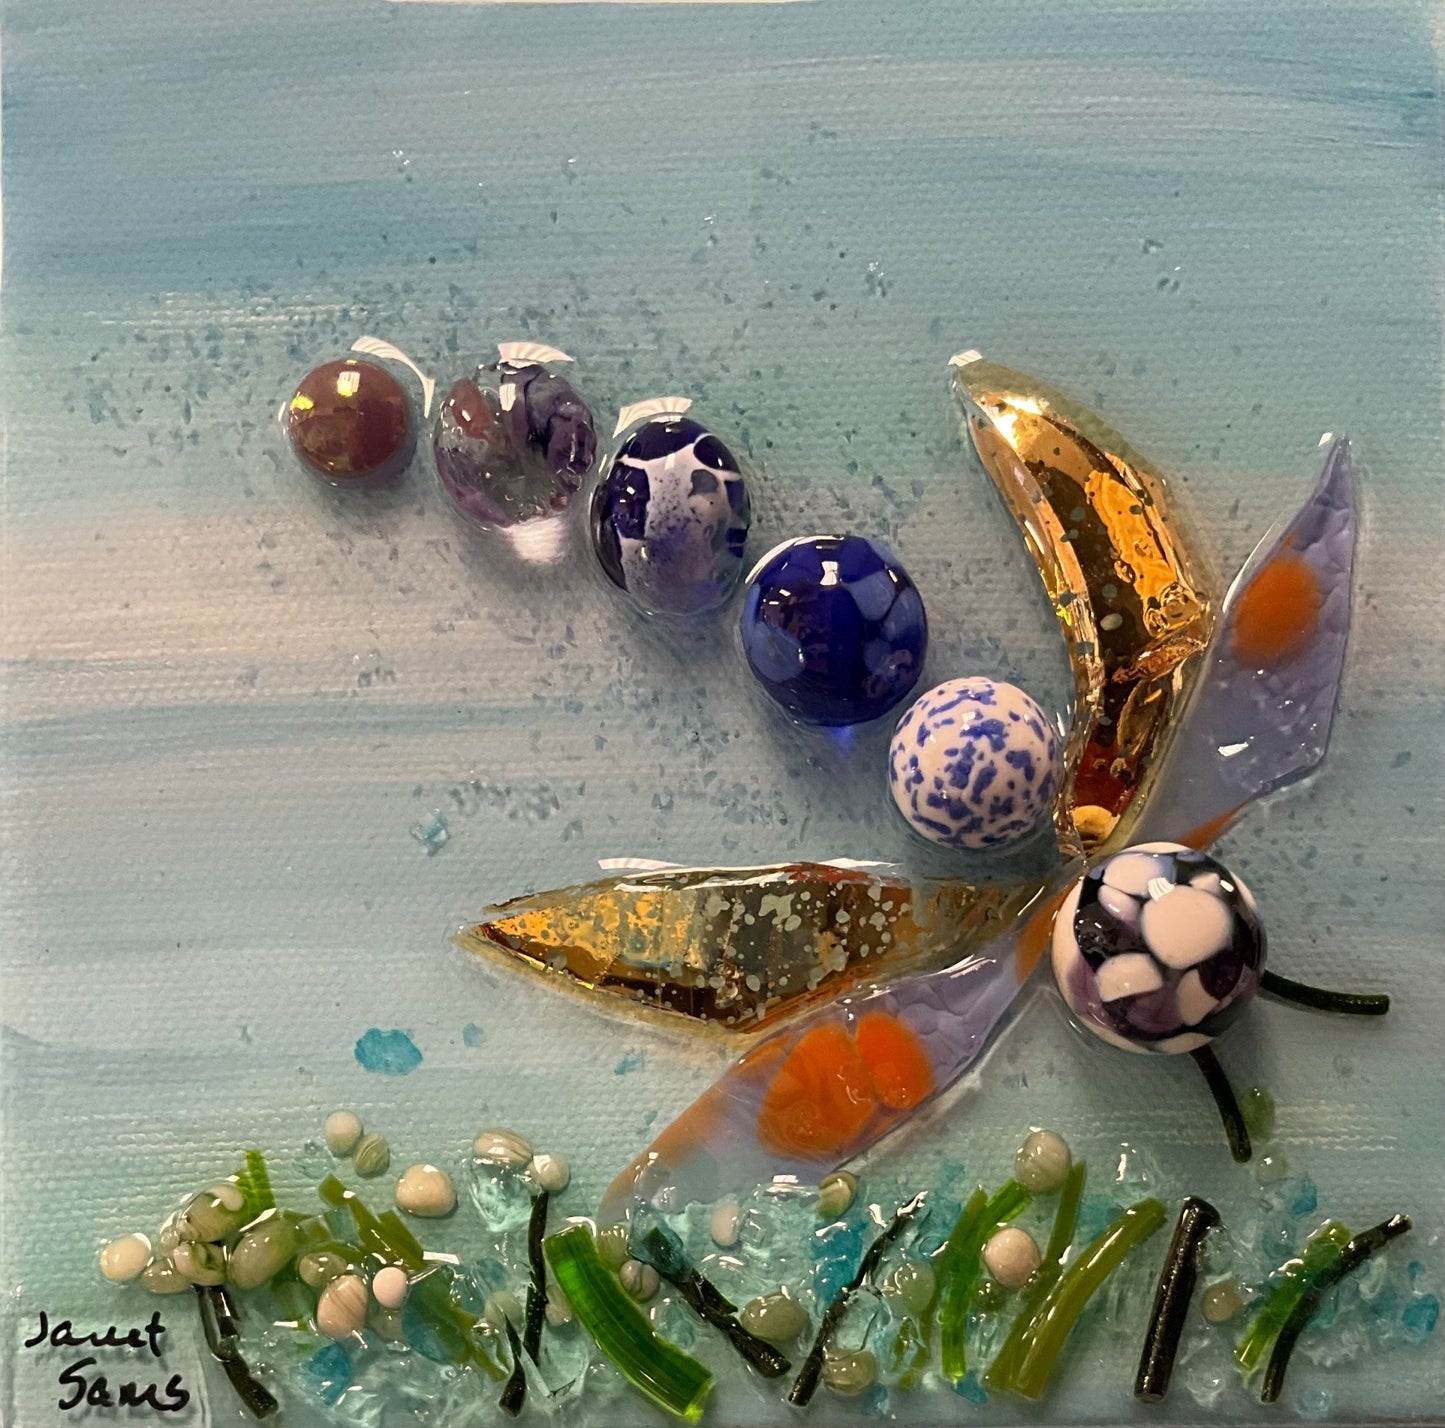 Mini Glass Collage-Dragonfly